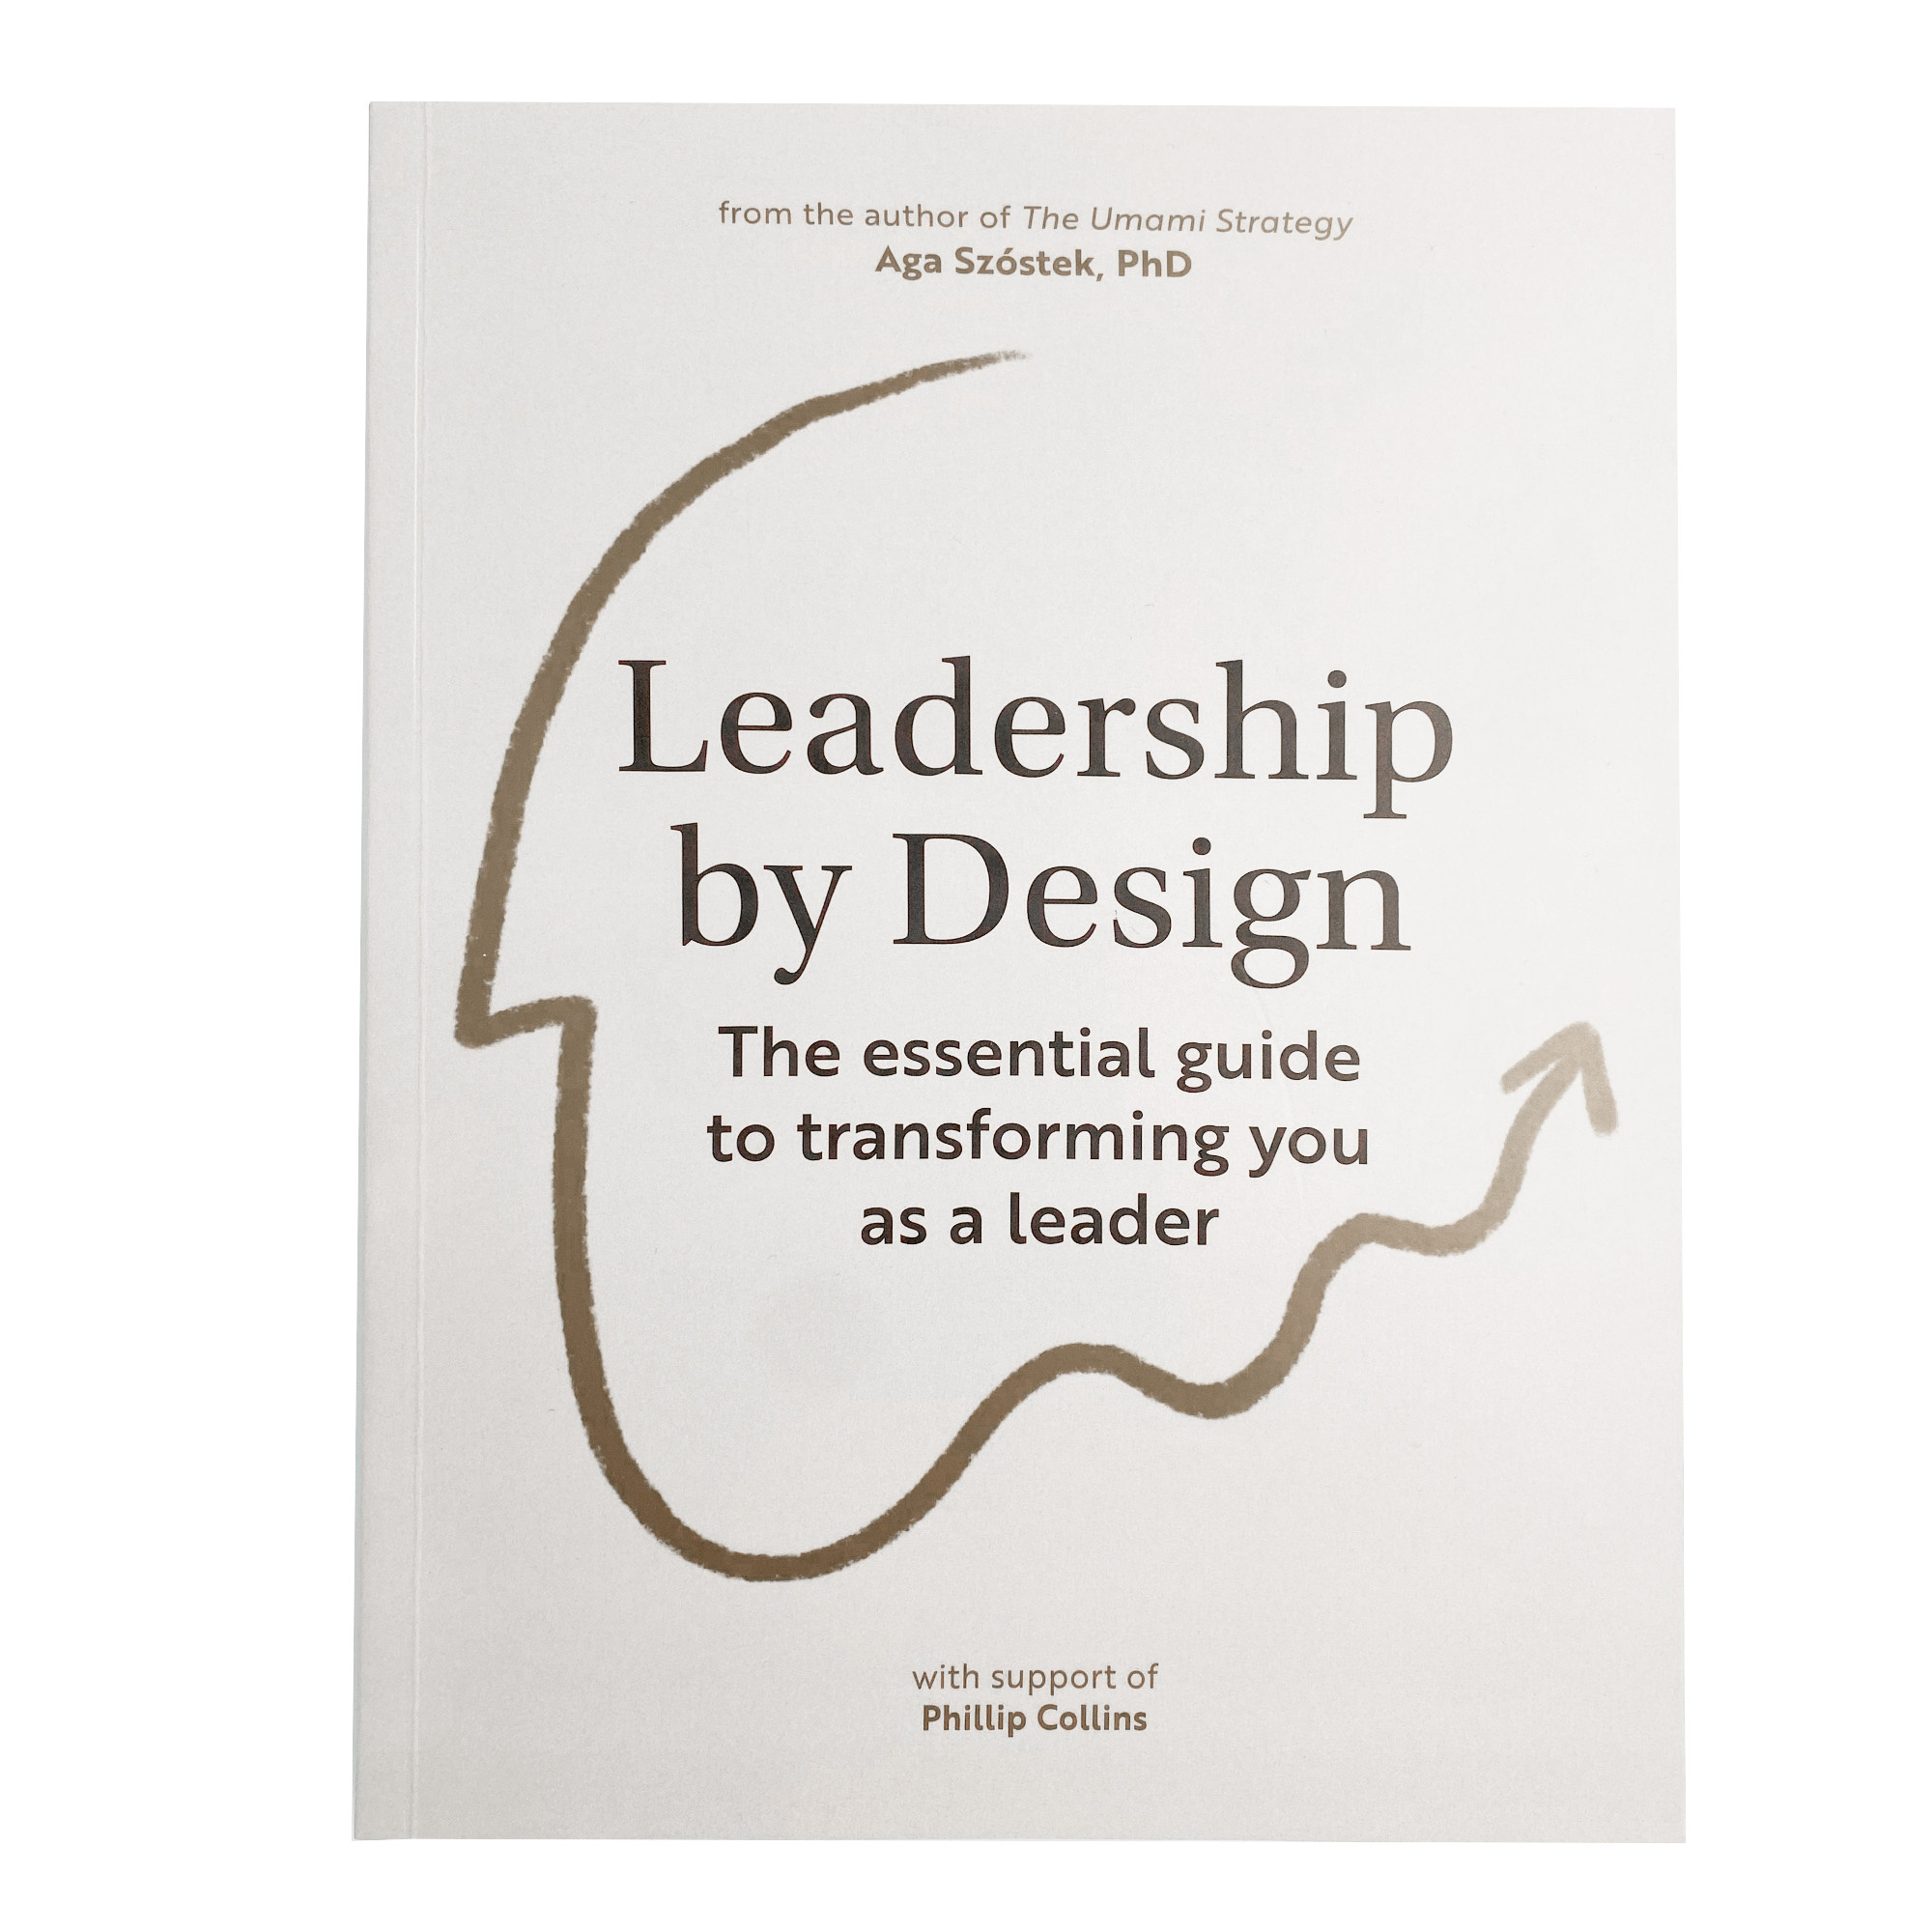 BIS　transform　Szòst　Aga　you　leader　a　Design:　Publishers　to　guide　A　by　Leadership　as